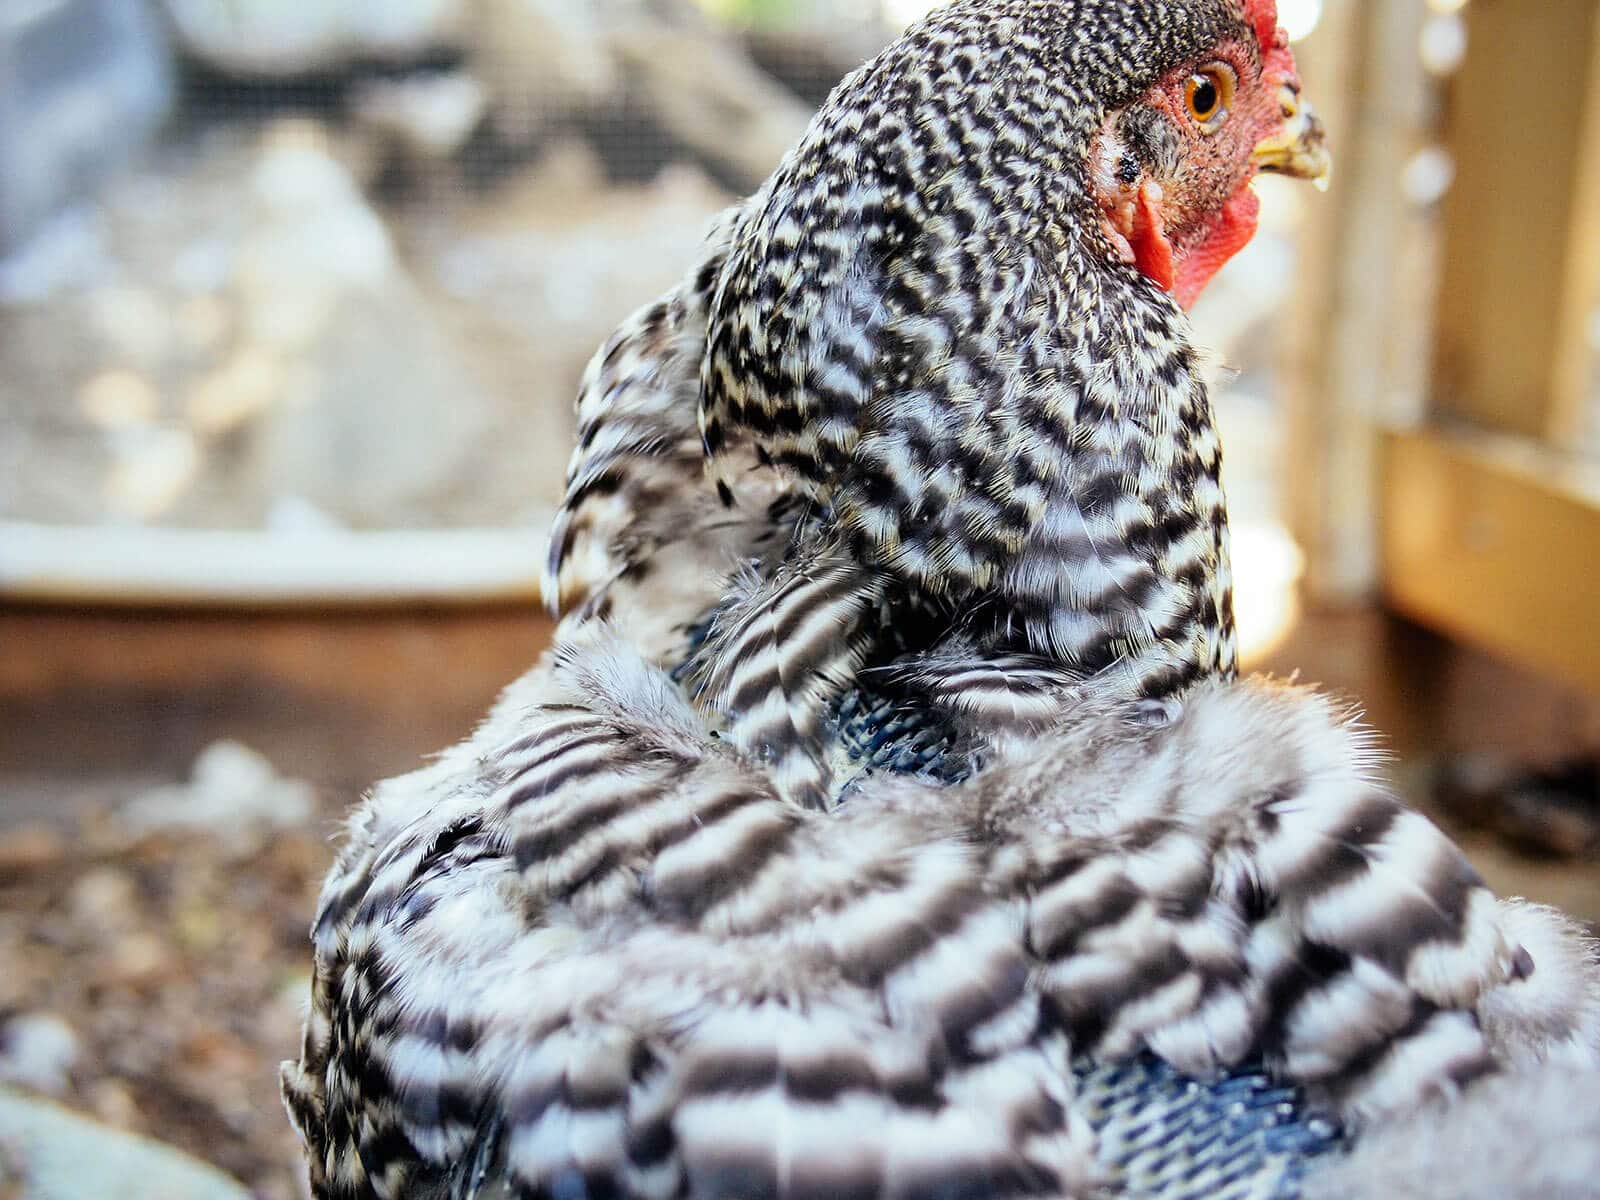 Barred Rock with new feathers growing down her back